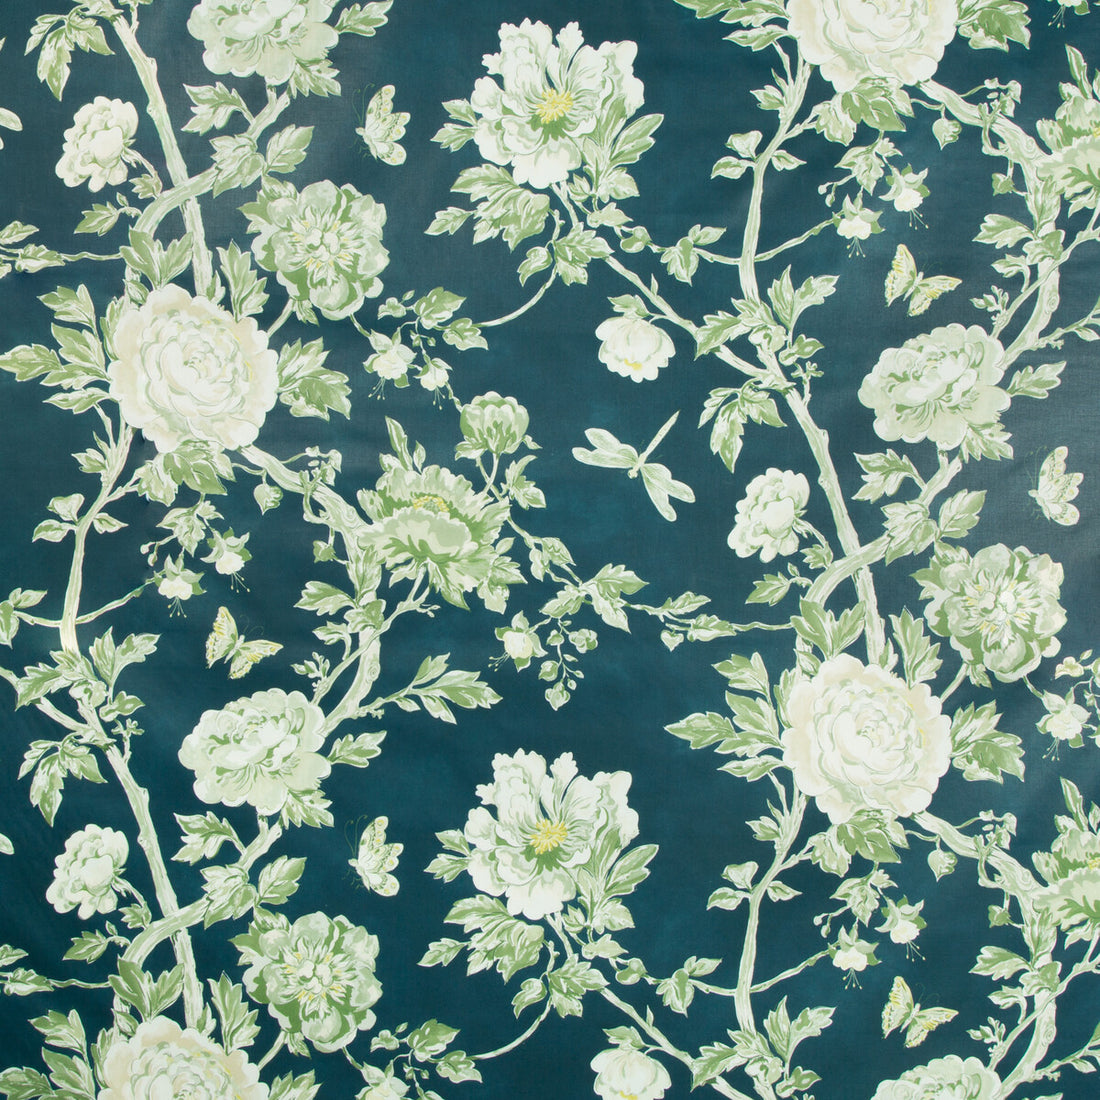 Les Pivoines Print fabric in green color - pattern 8017135.30.0 - by Brunschwig &amp; Fils in the Les Ensembliers collection